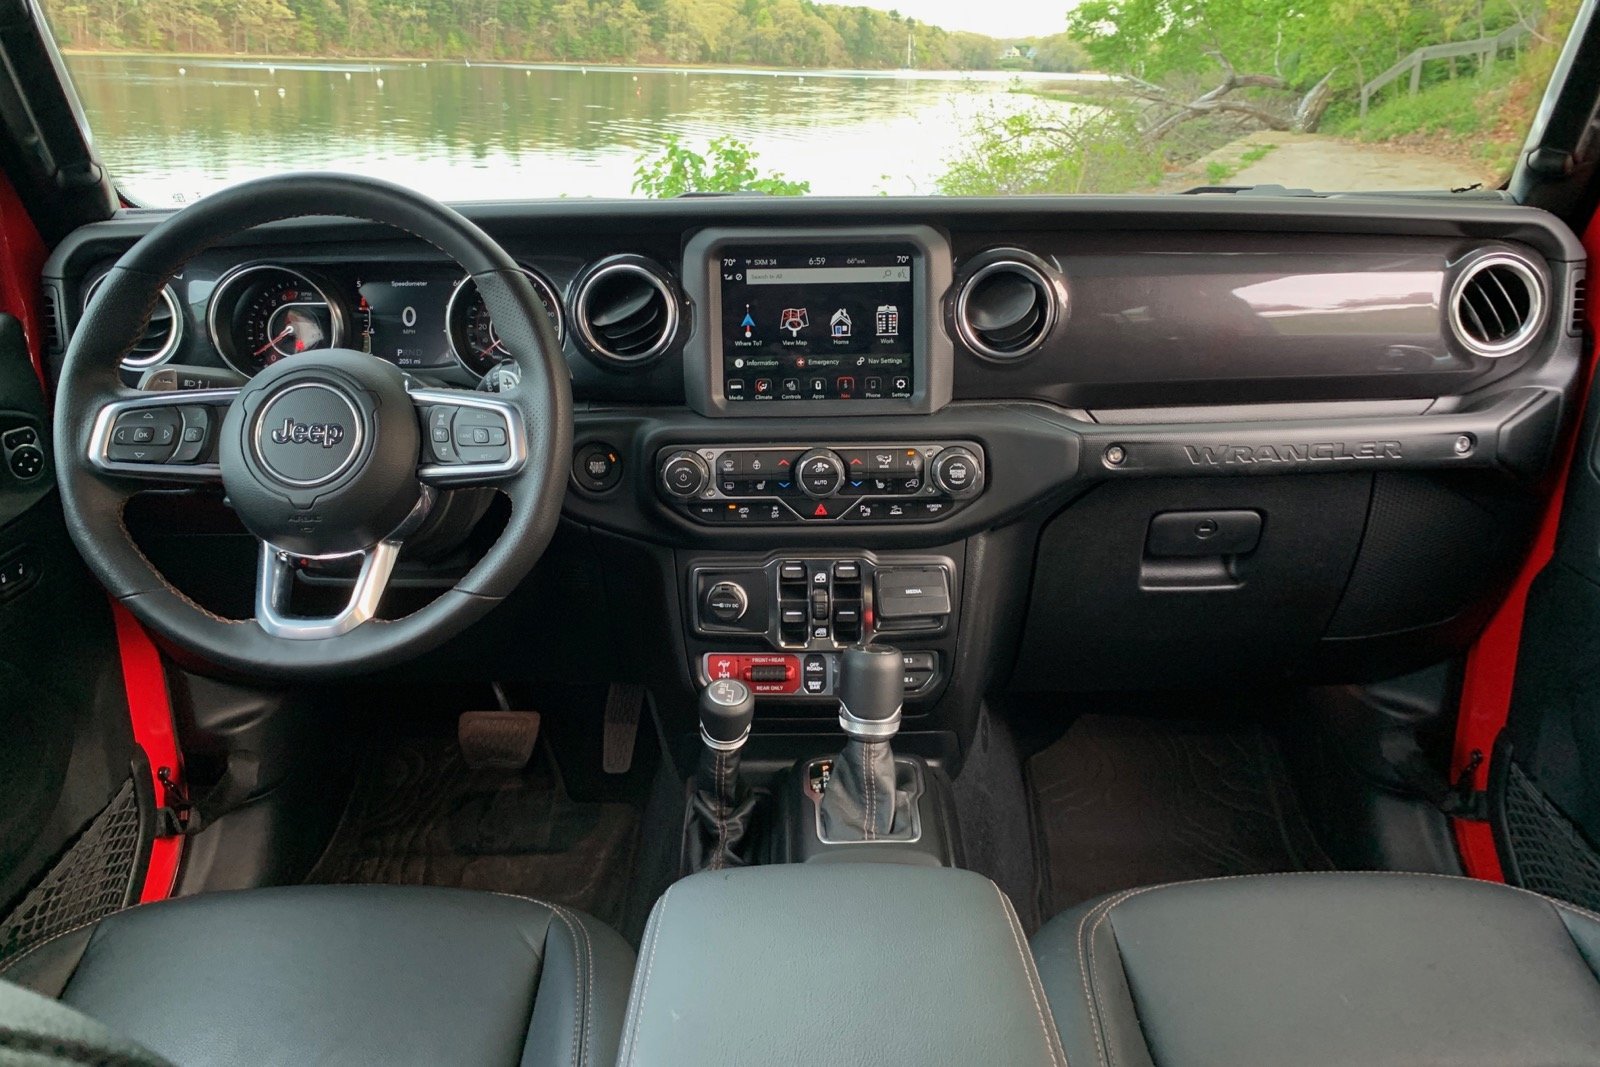 2021 Jeep Wrangler Unlimited Test Drive Review